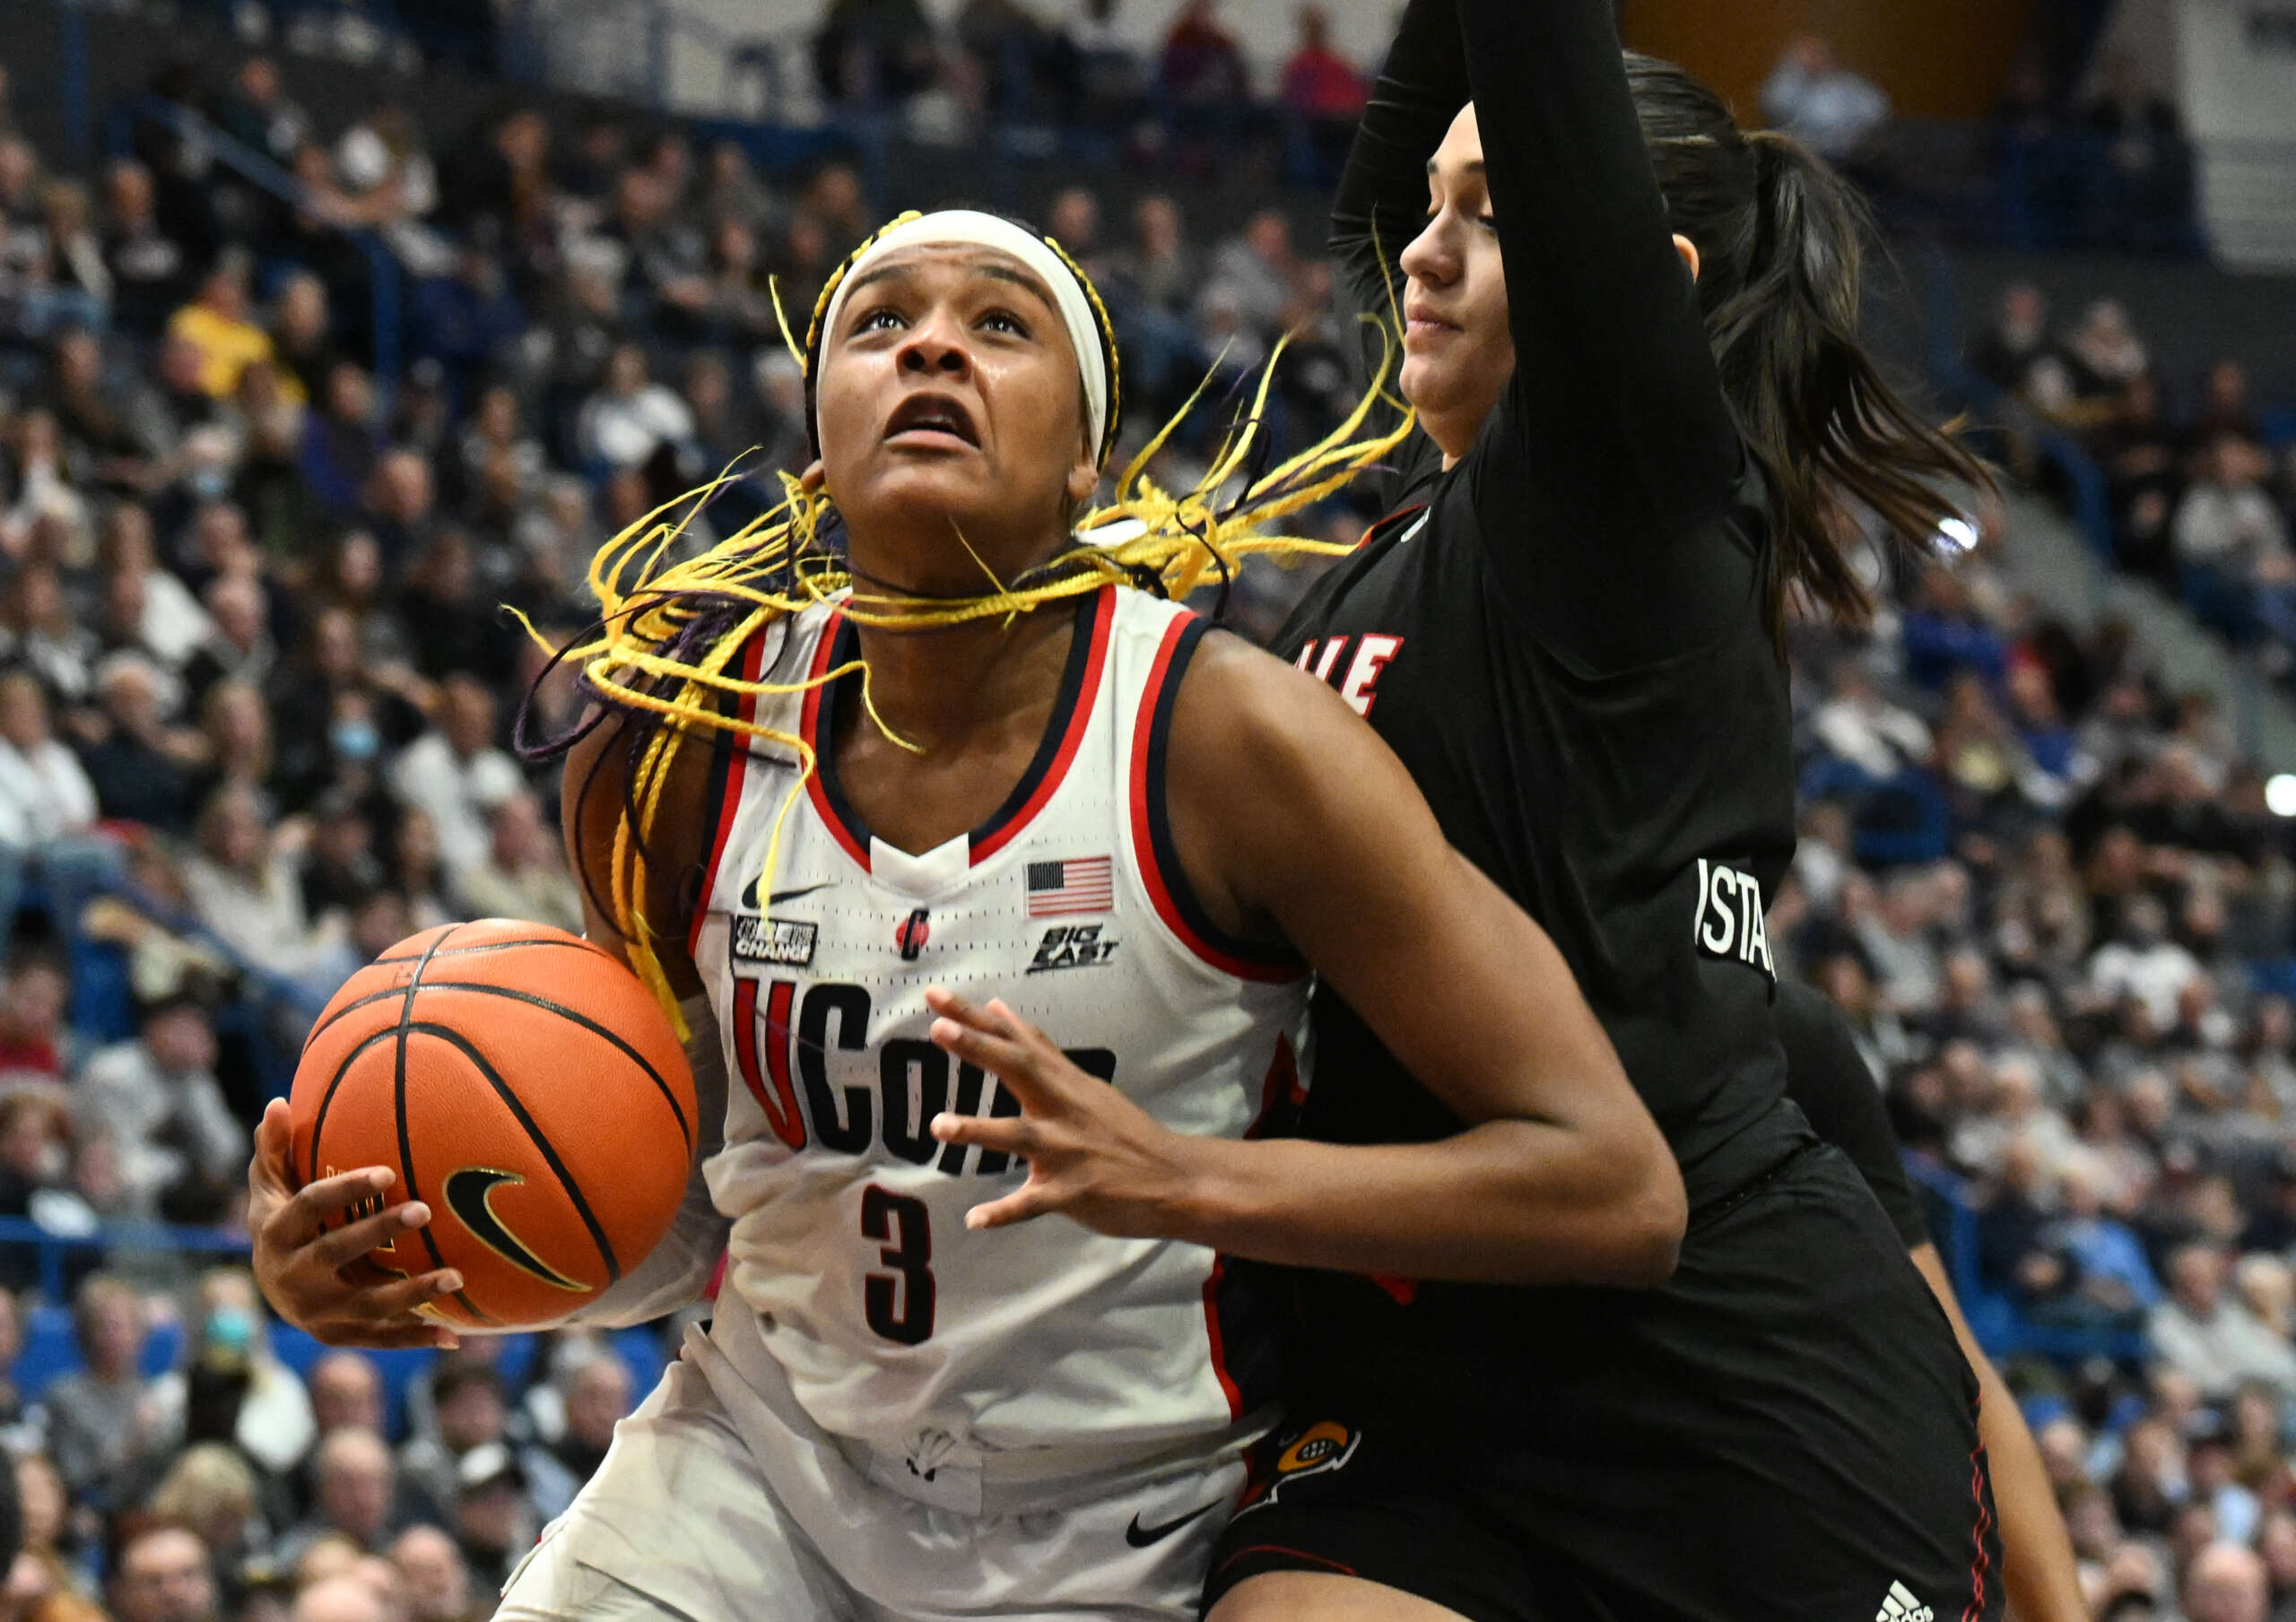 Dom Amore: Now it’s Aaliyah Edwards’ turn to inspire the next Canadian to play for UConn women